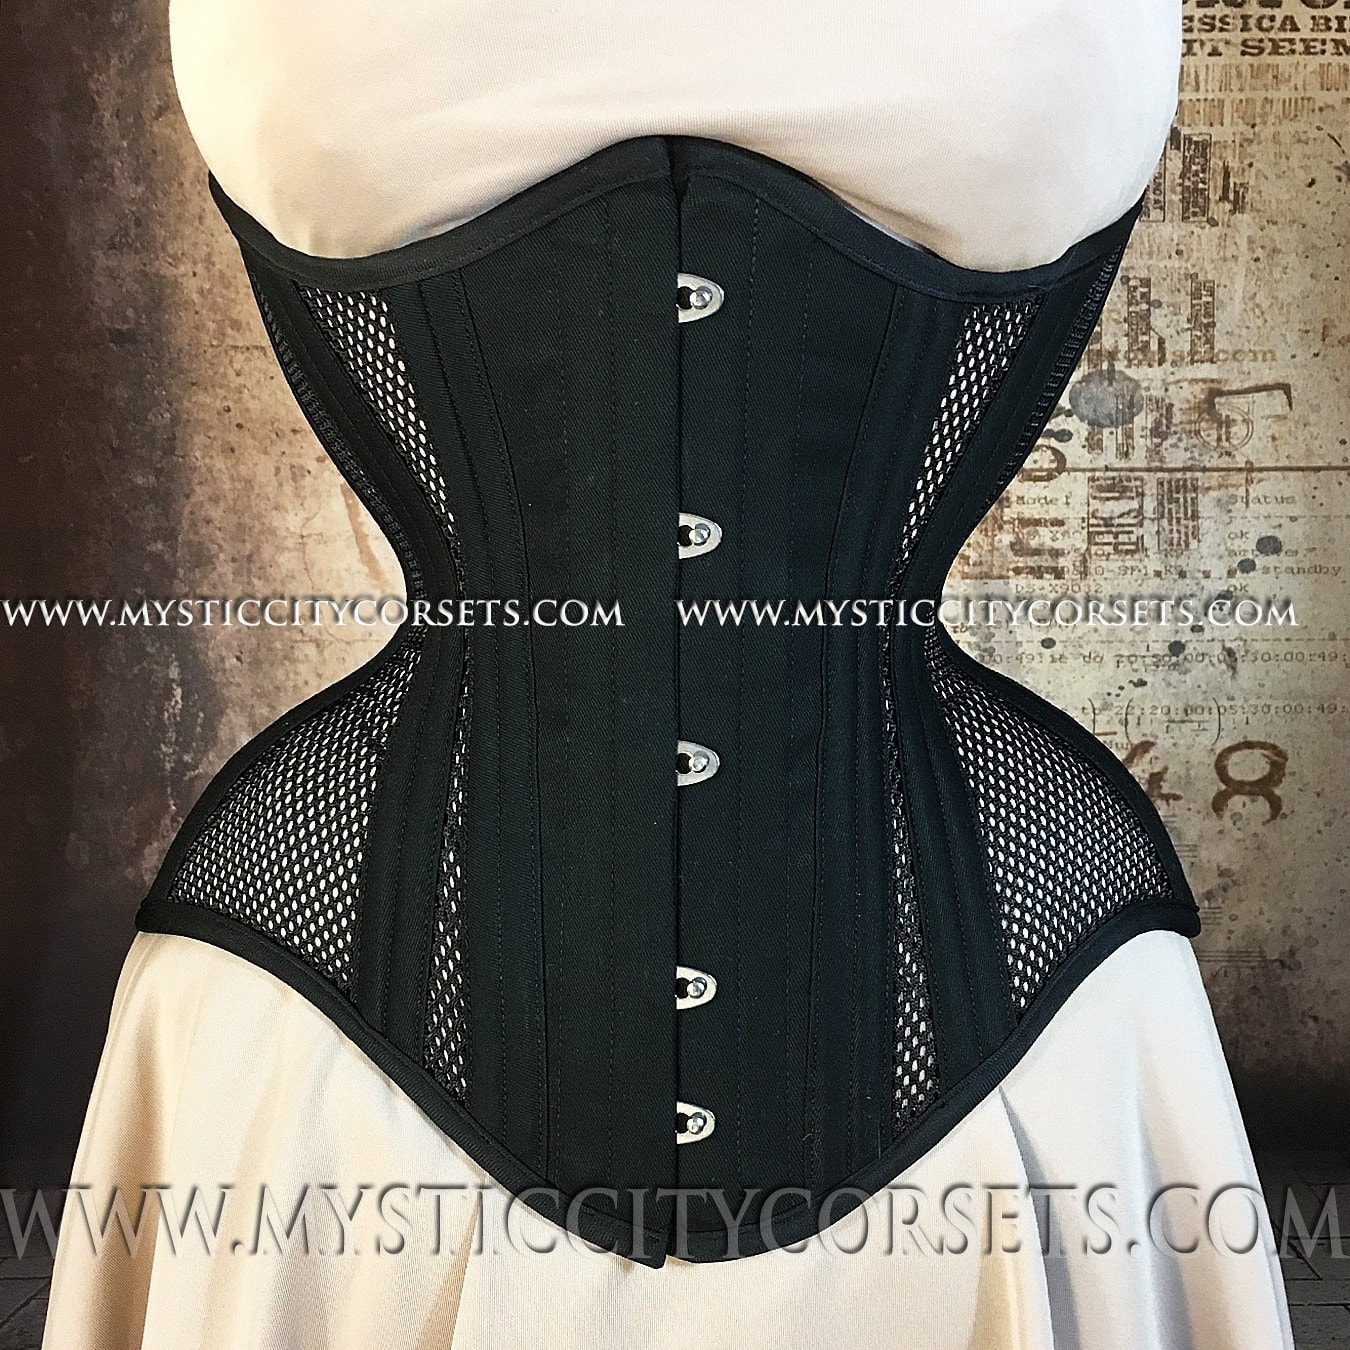 official collection Mystic City Corset size 20 inch mesh corset